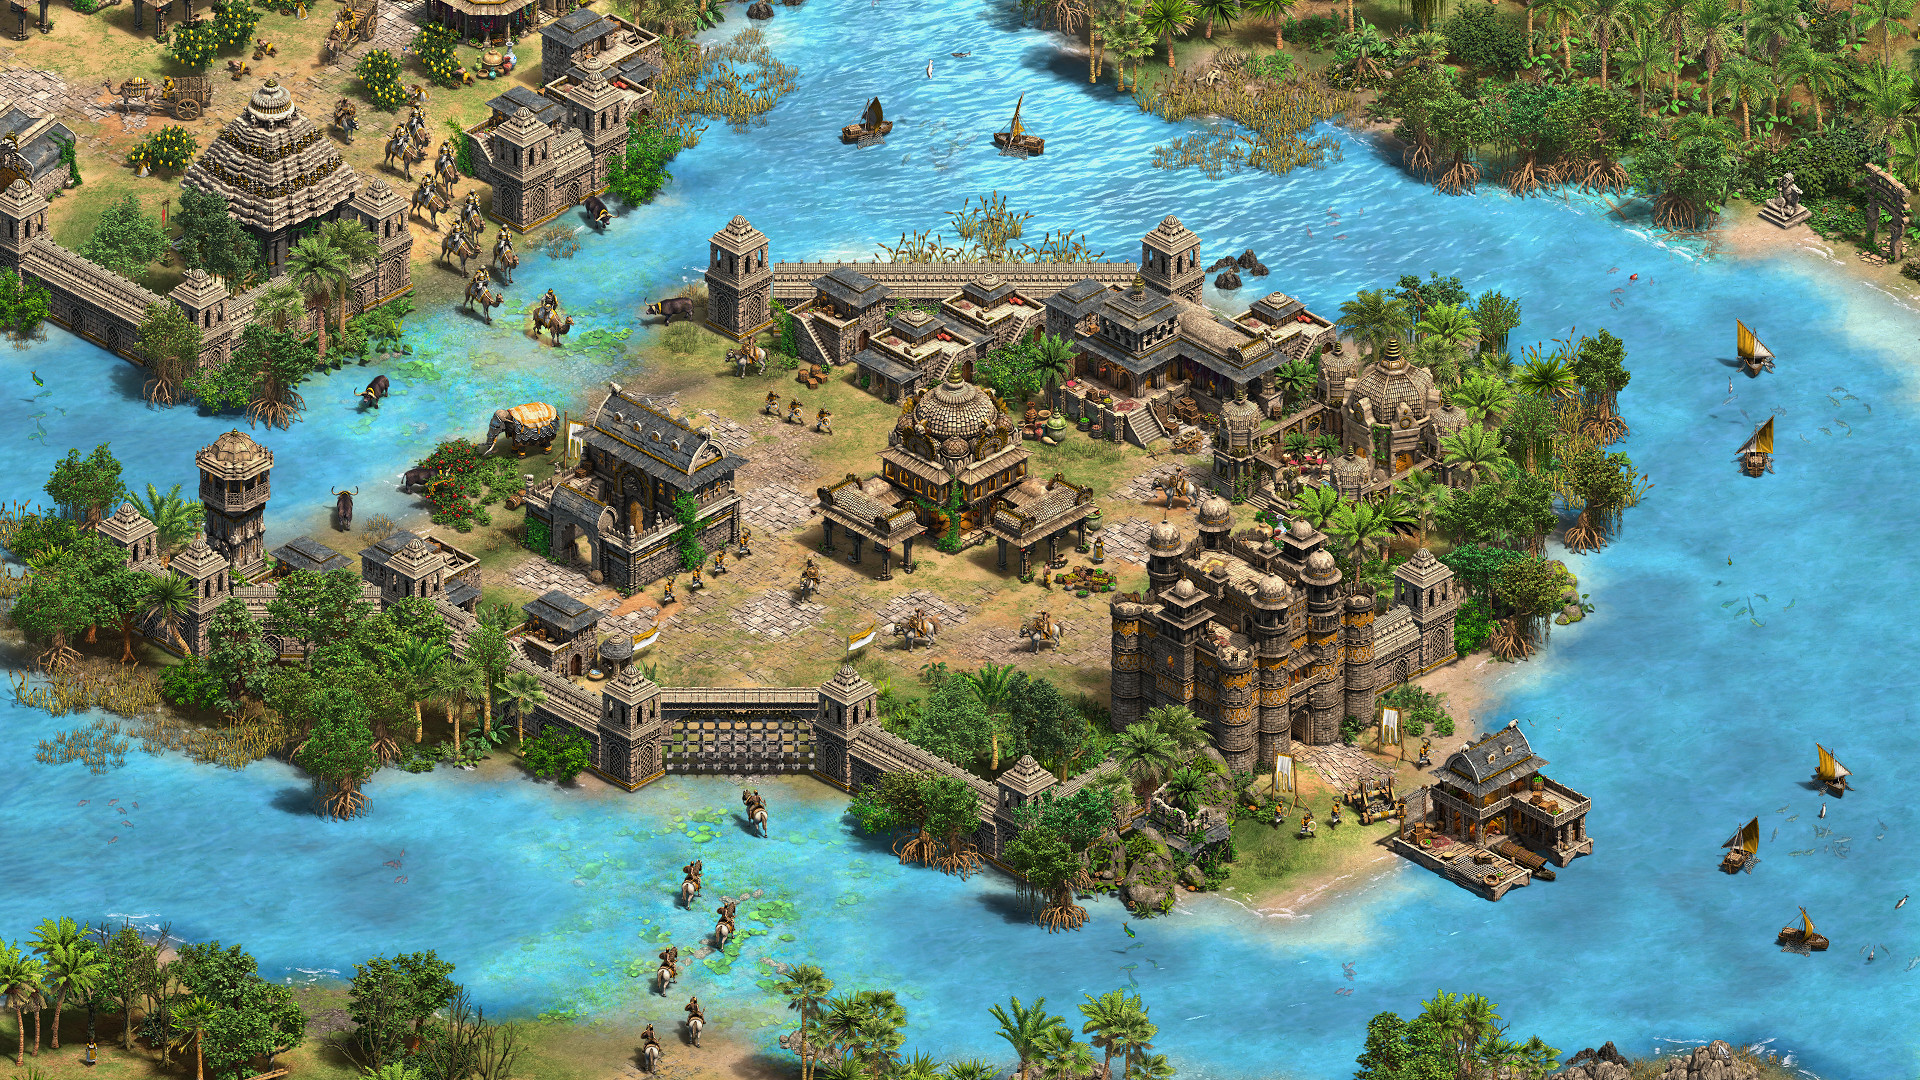 Age of Empires II: Definitive Edition - Dynasties of India Featured Screenshot #1